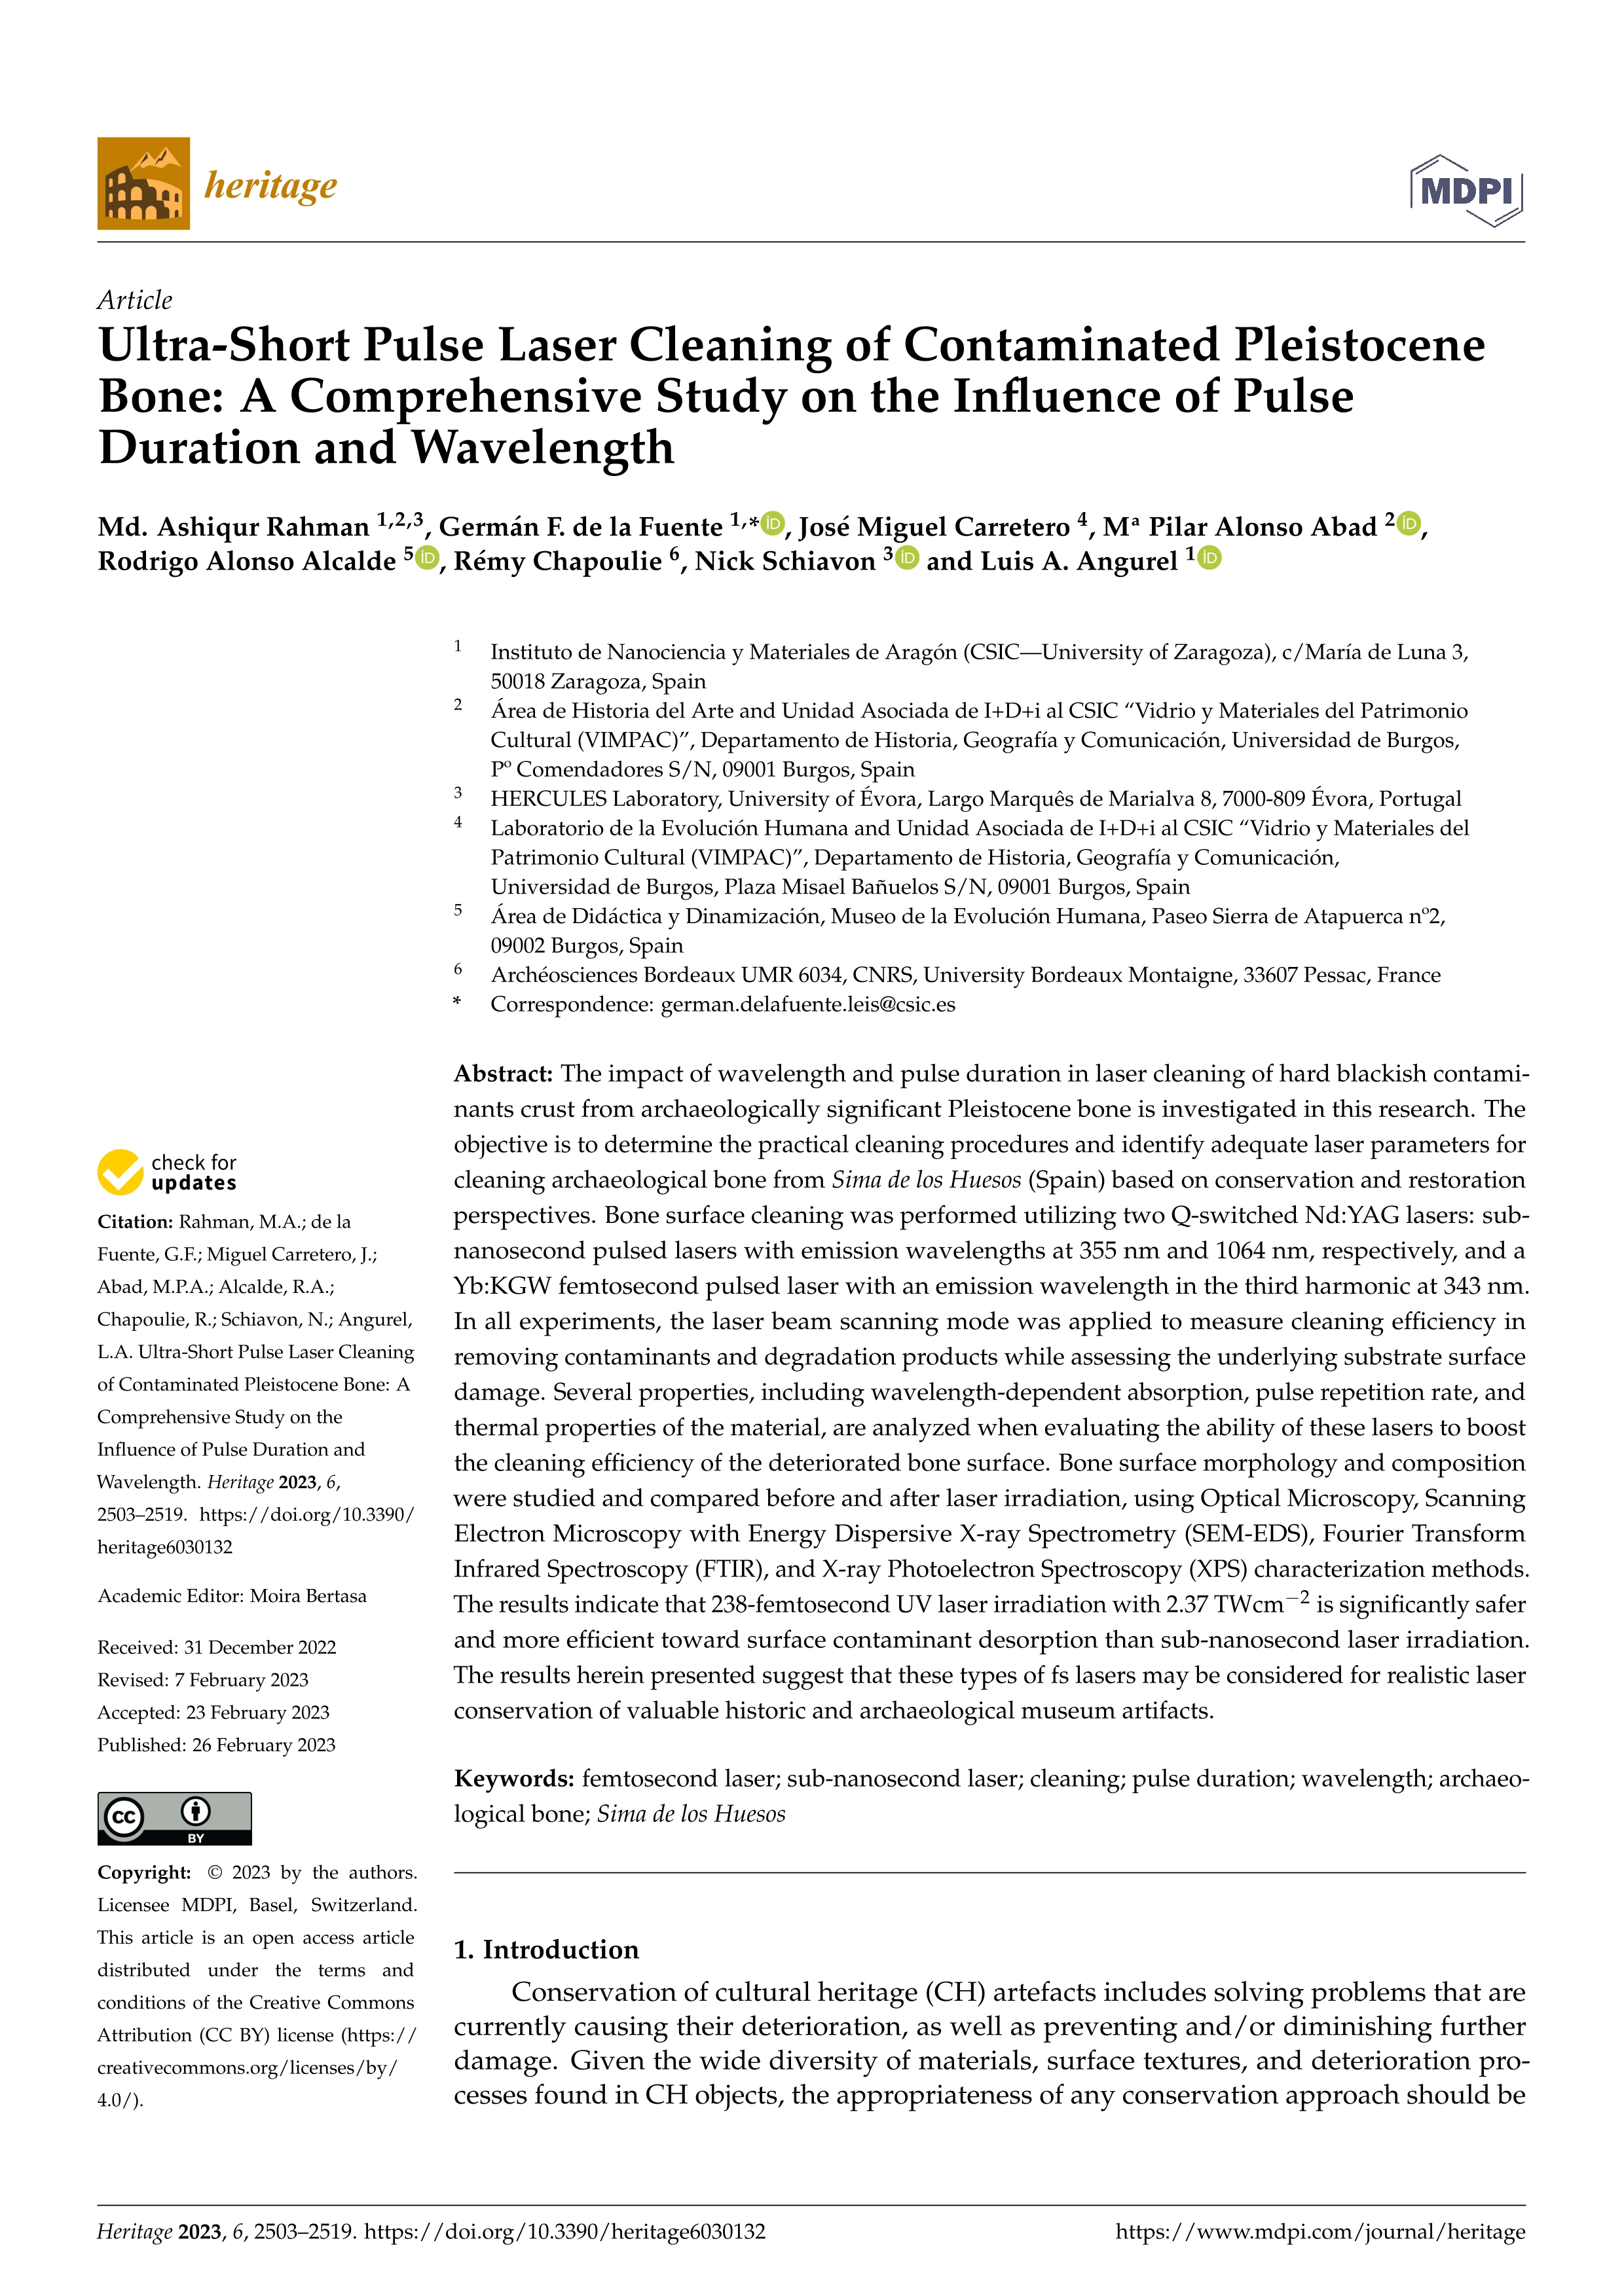 Ultra-Short Pulse Laser Cleaning of Contaminated Pleistocene Bone: A Comprehensive Study on the Influence of Pulse Duration and Wavelength